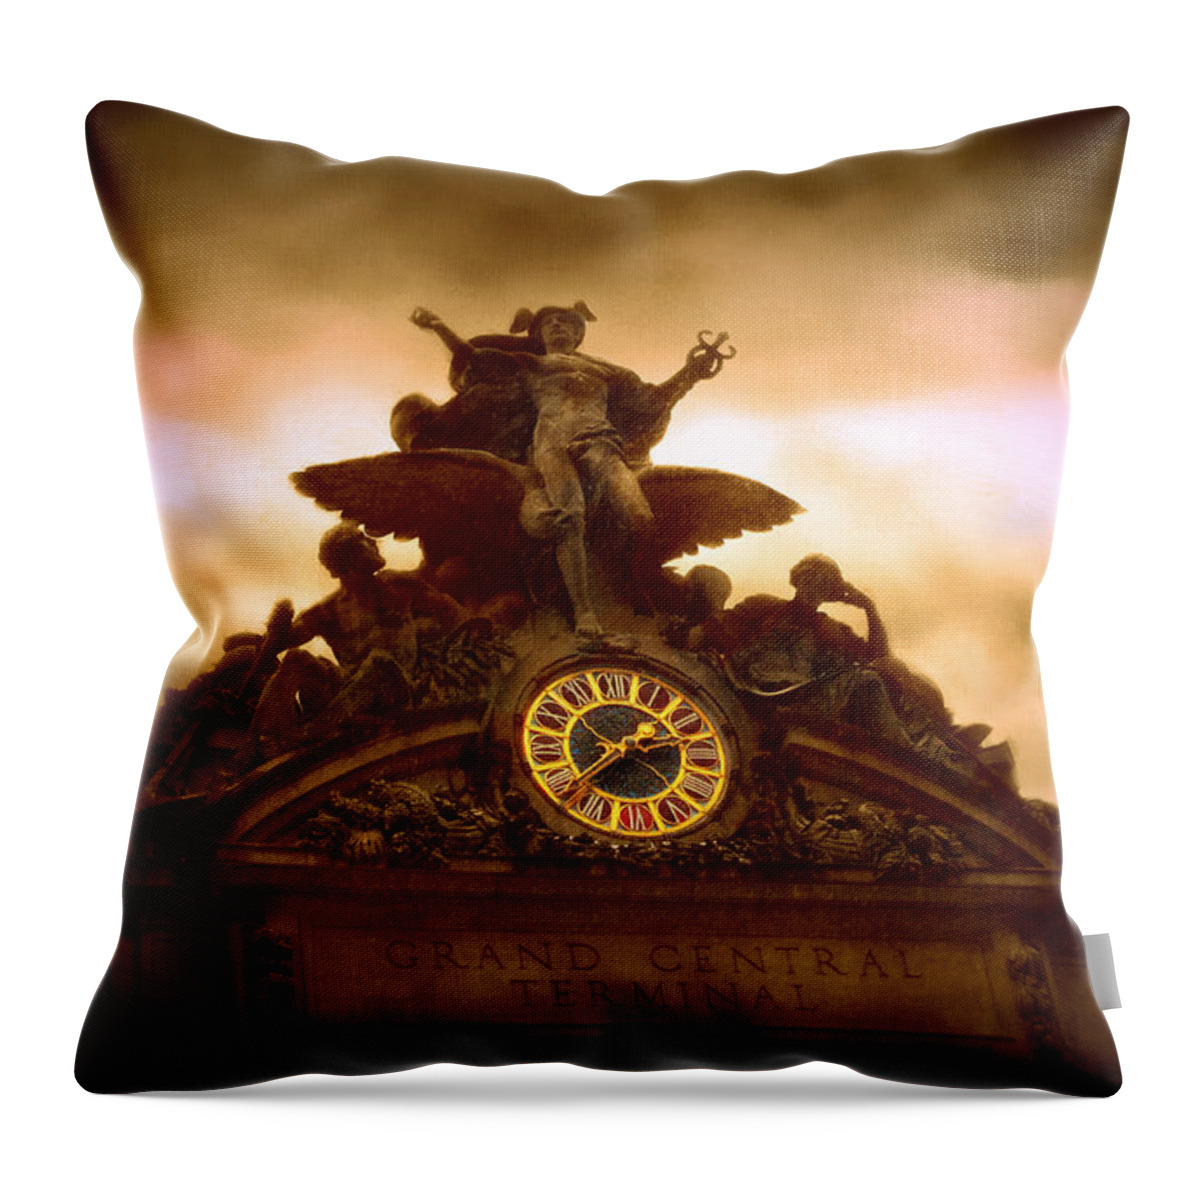 Grand Central Throw Pillow featuring the photograph Grand Central Terminal by Jessica Jenney